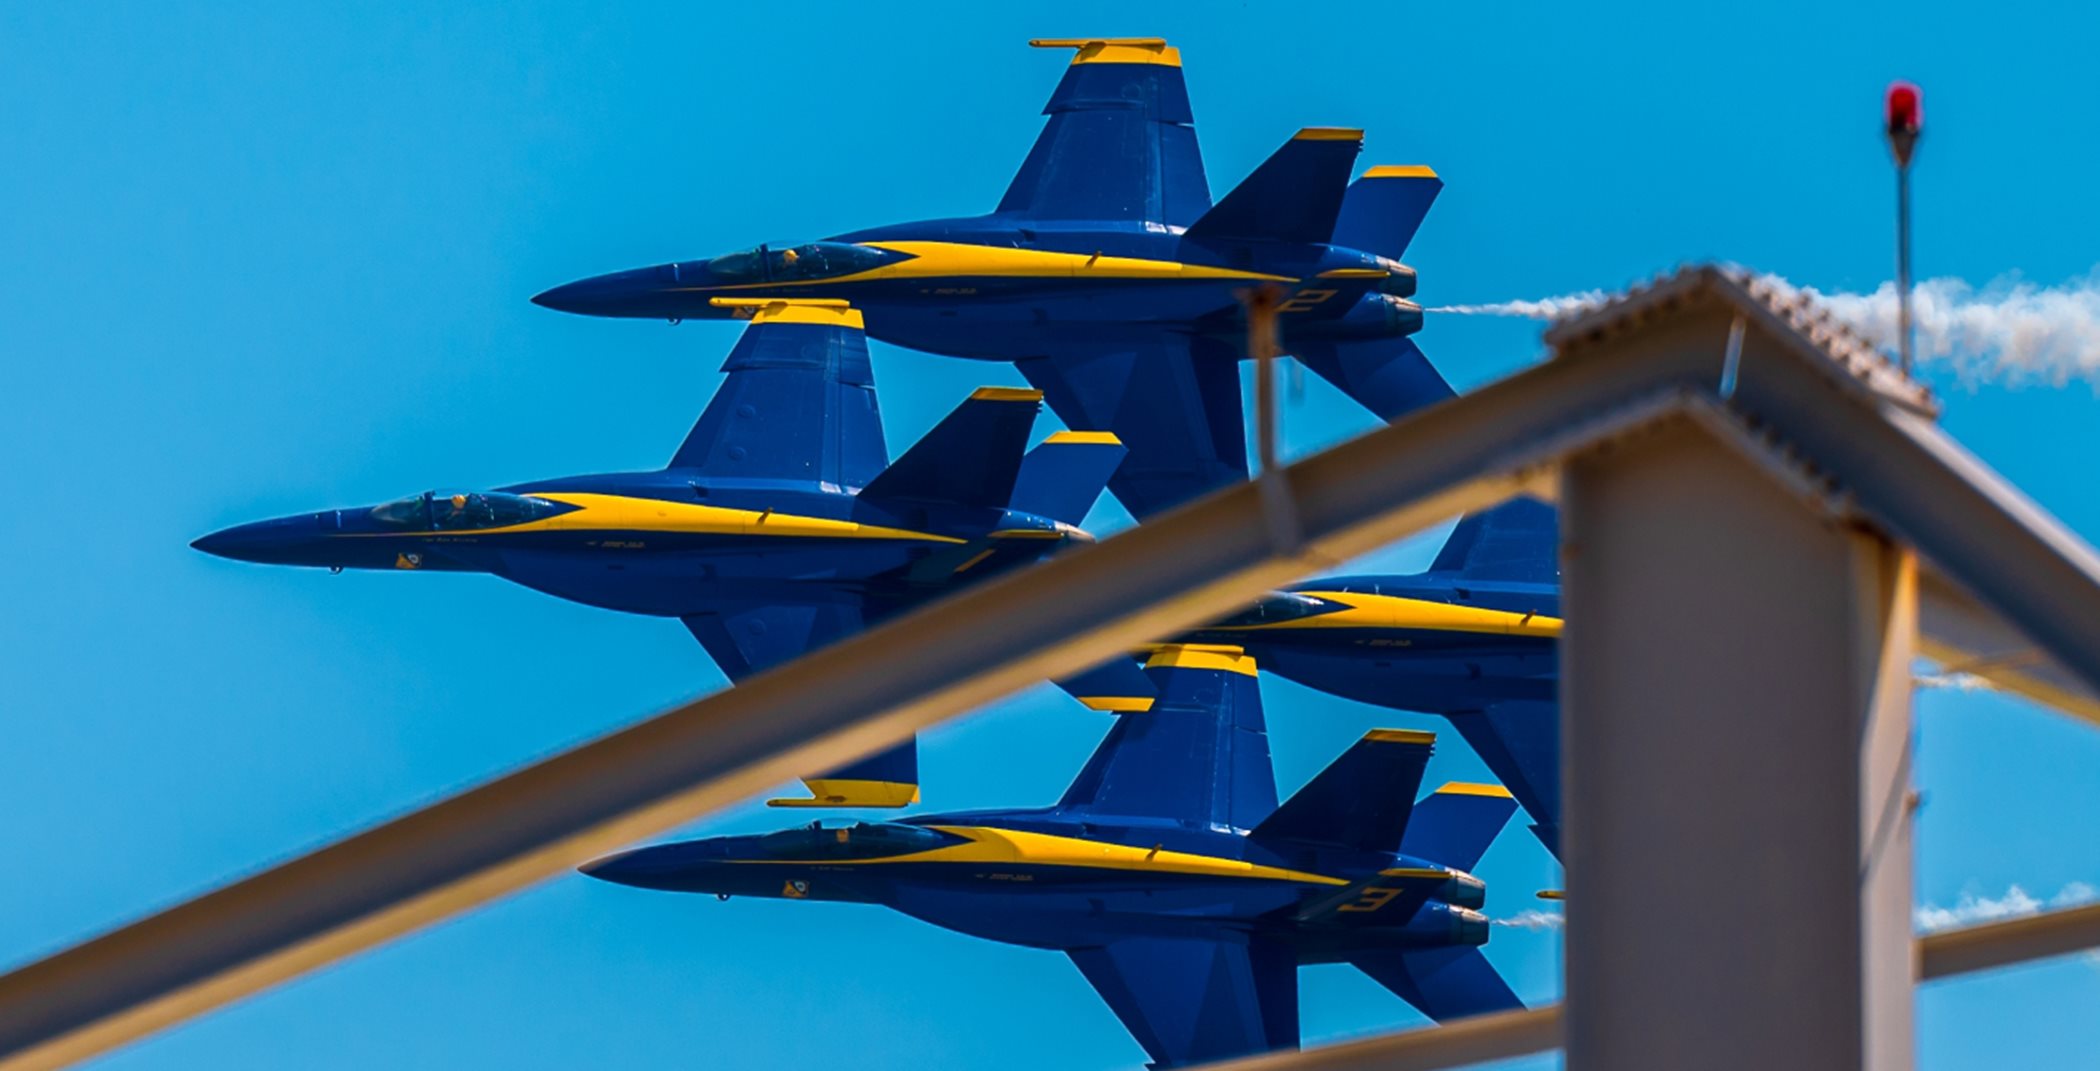 See the Blue Angels perform